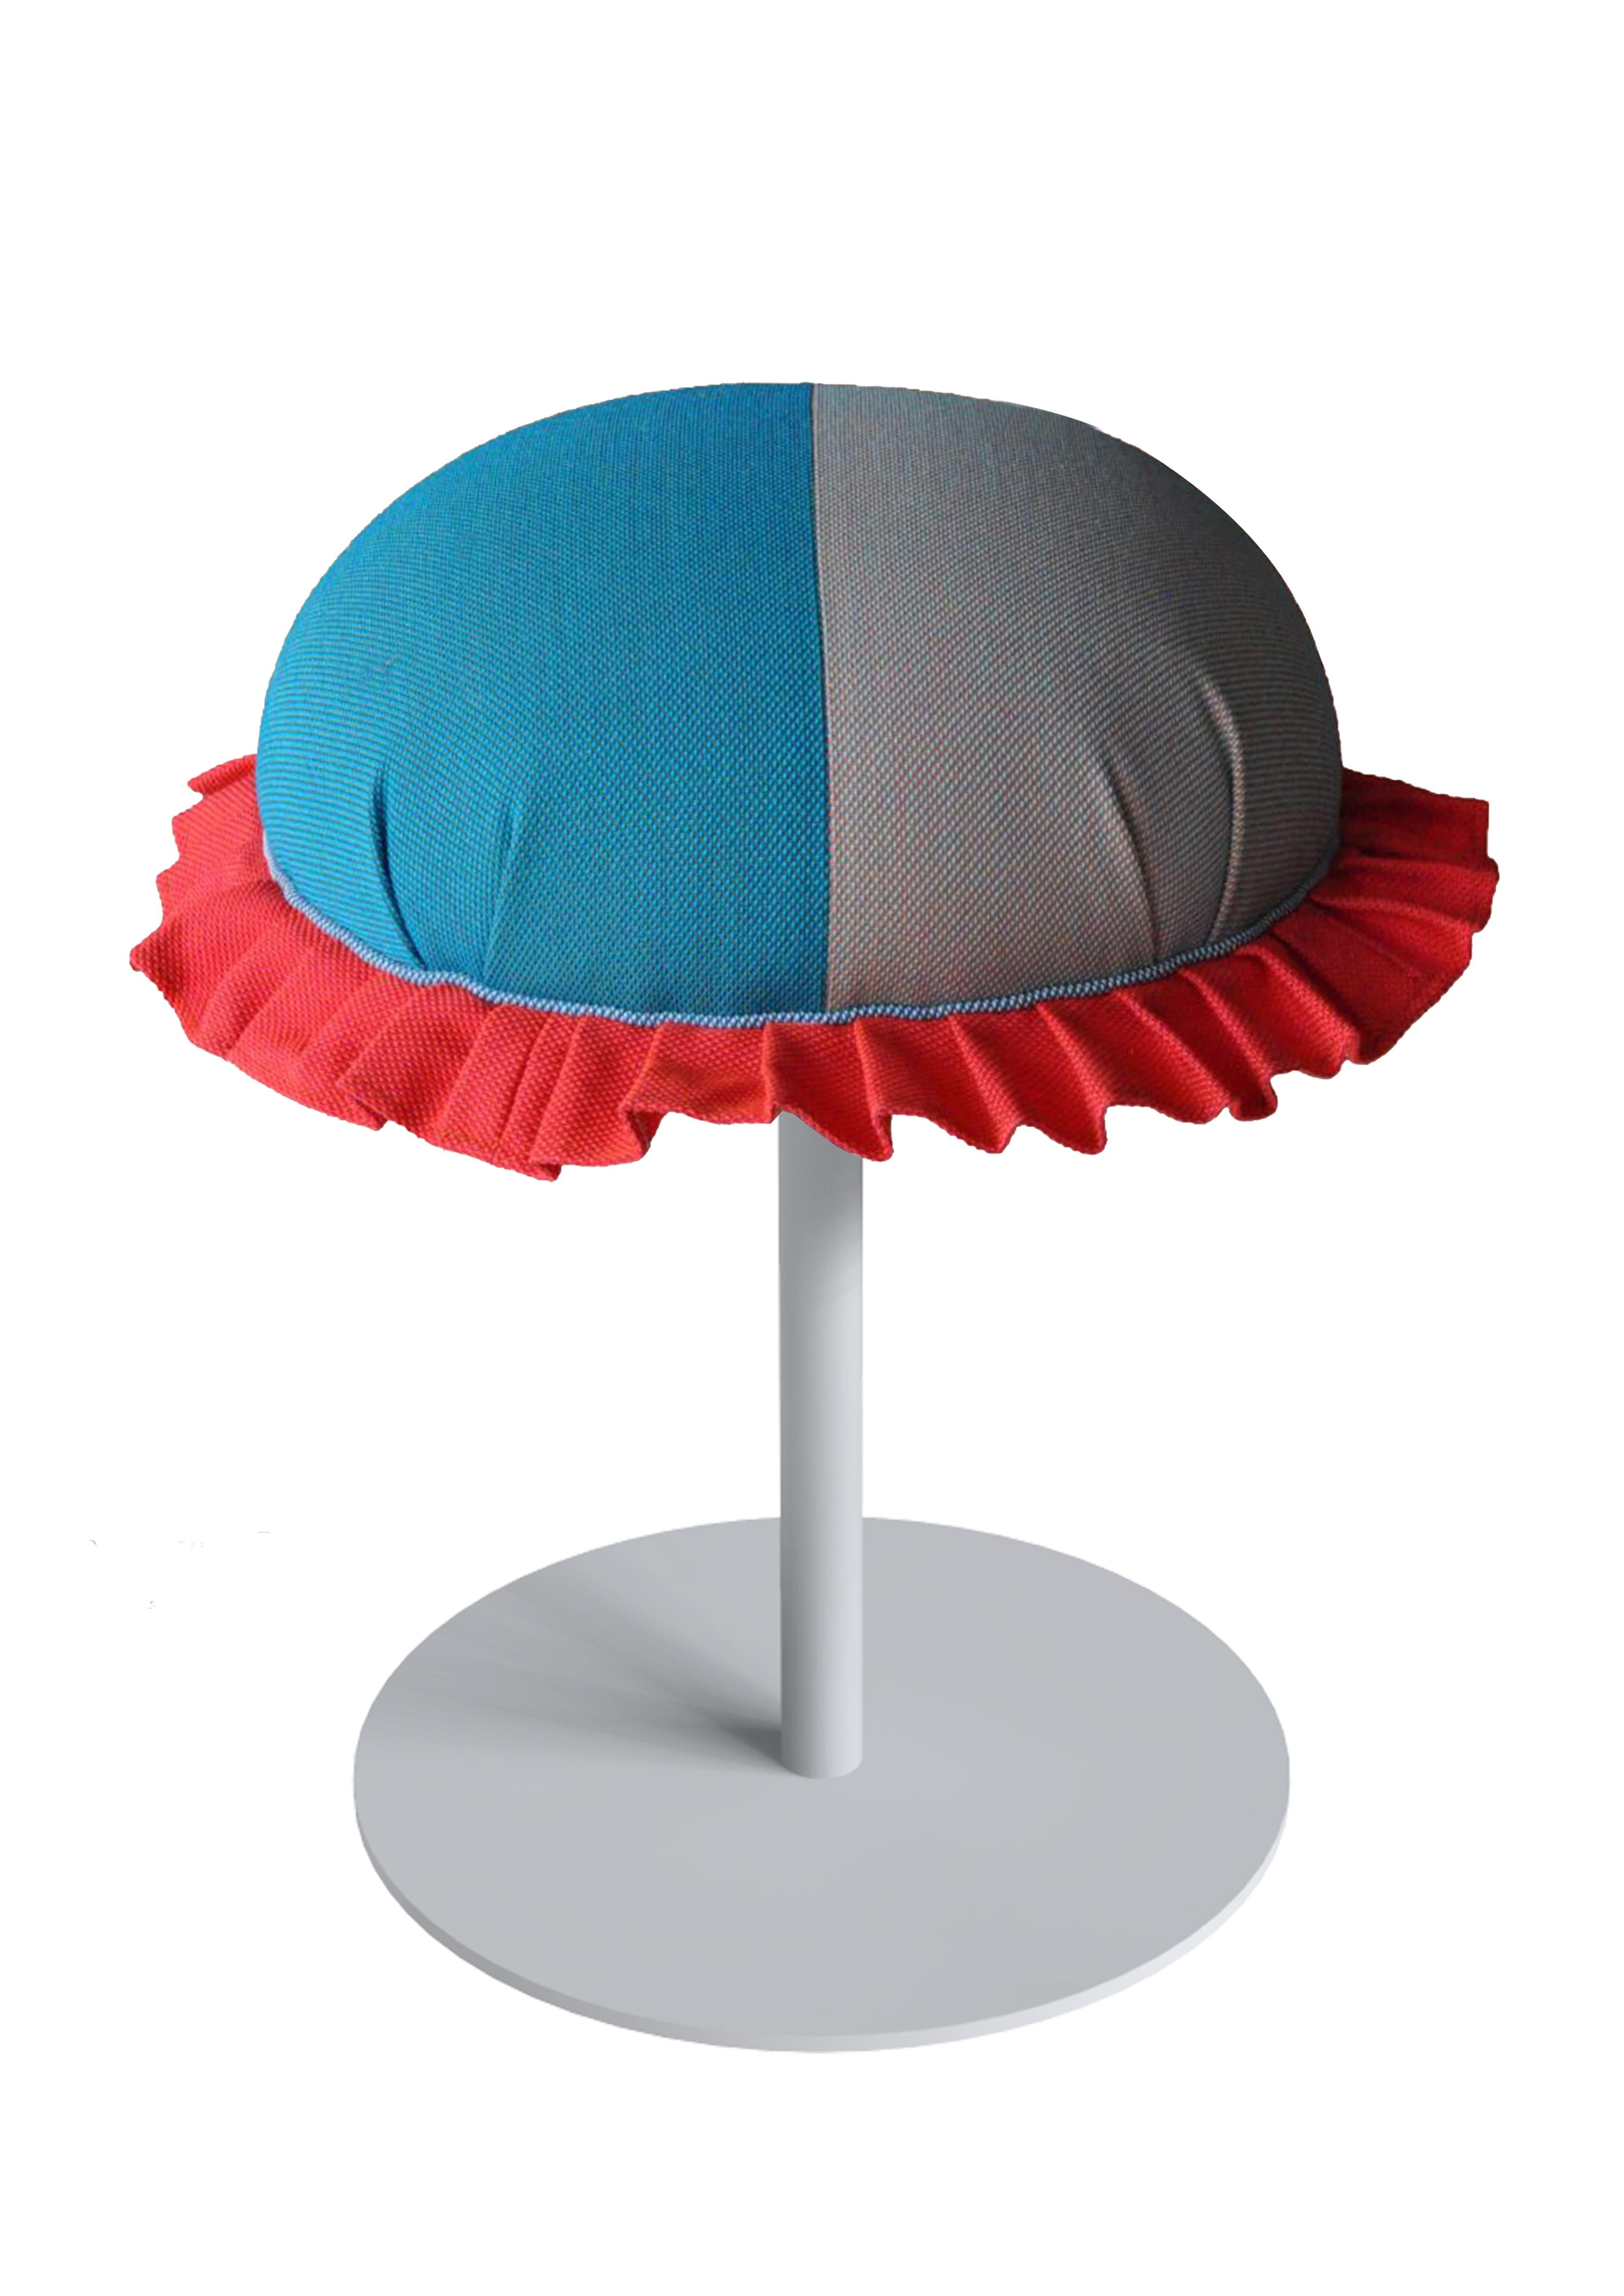 puff-puff by Sema Topaloglu.
This pouf has iron-coated legs and cloth upholstery.
With different colour options. 
Fabric is specifically chosen as art-craft material and has local feeling.
puff-puff is a contemporary piece which brings happiness